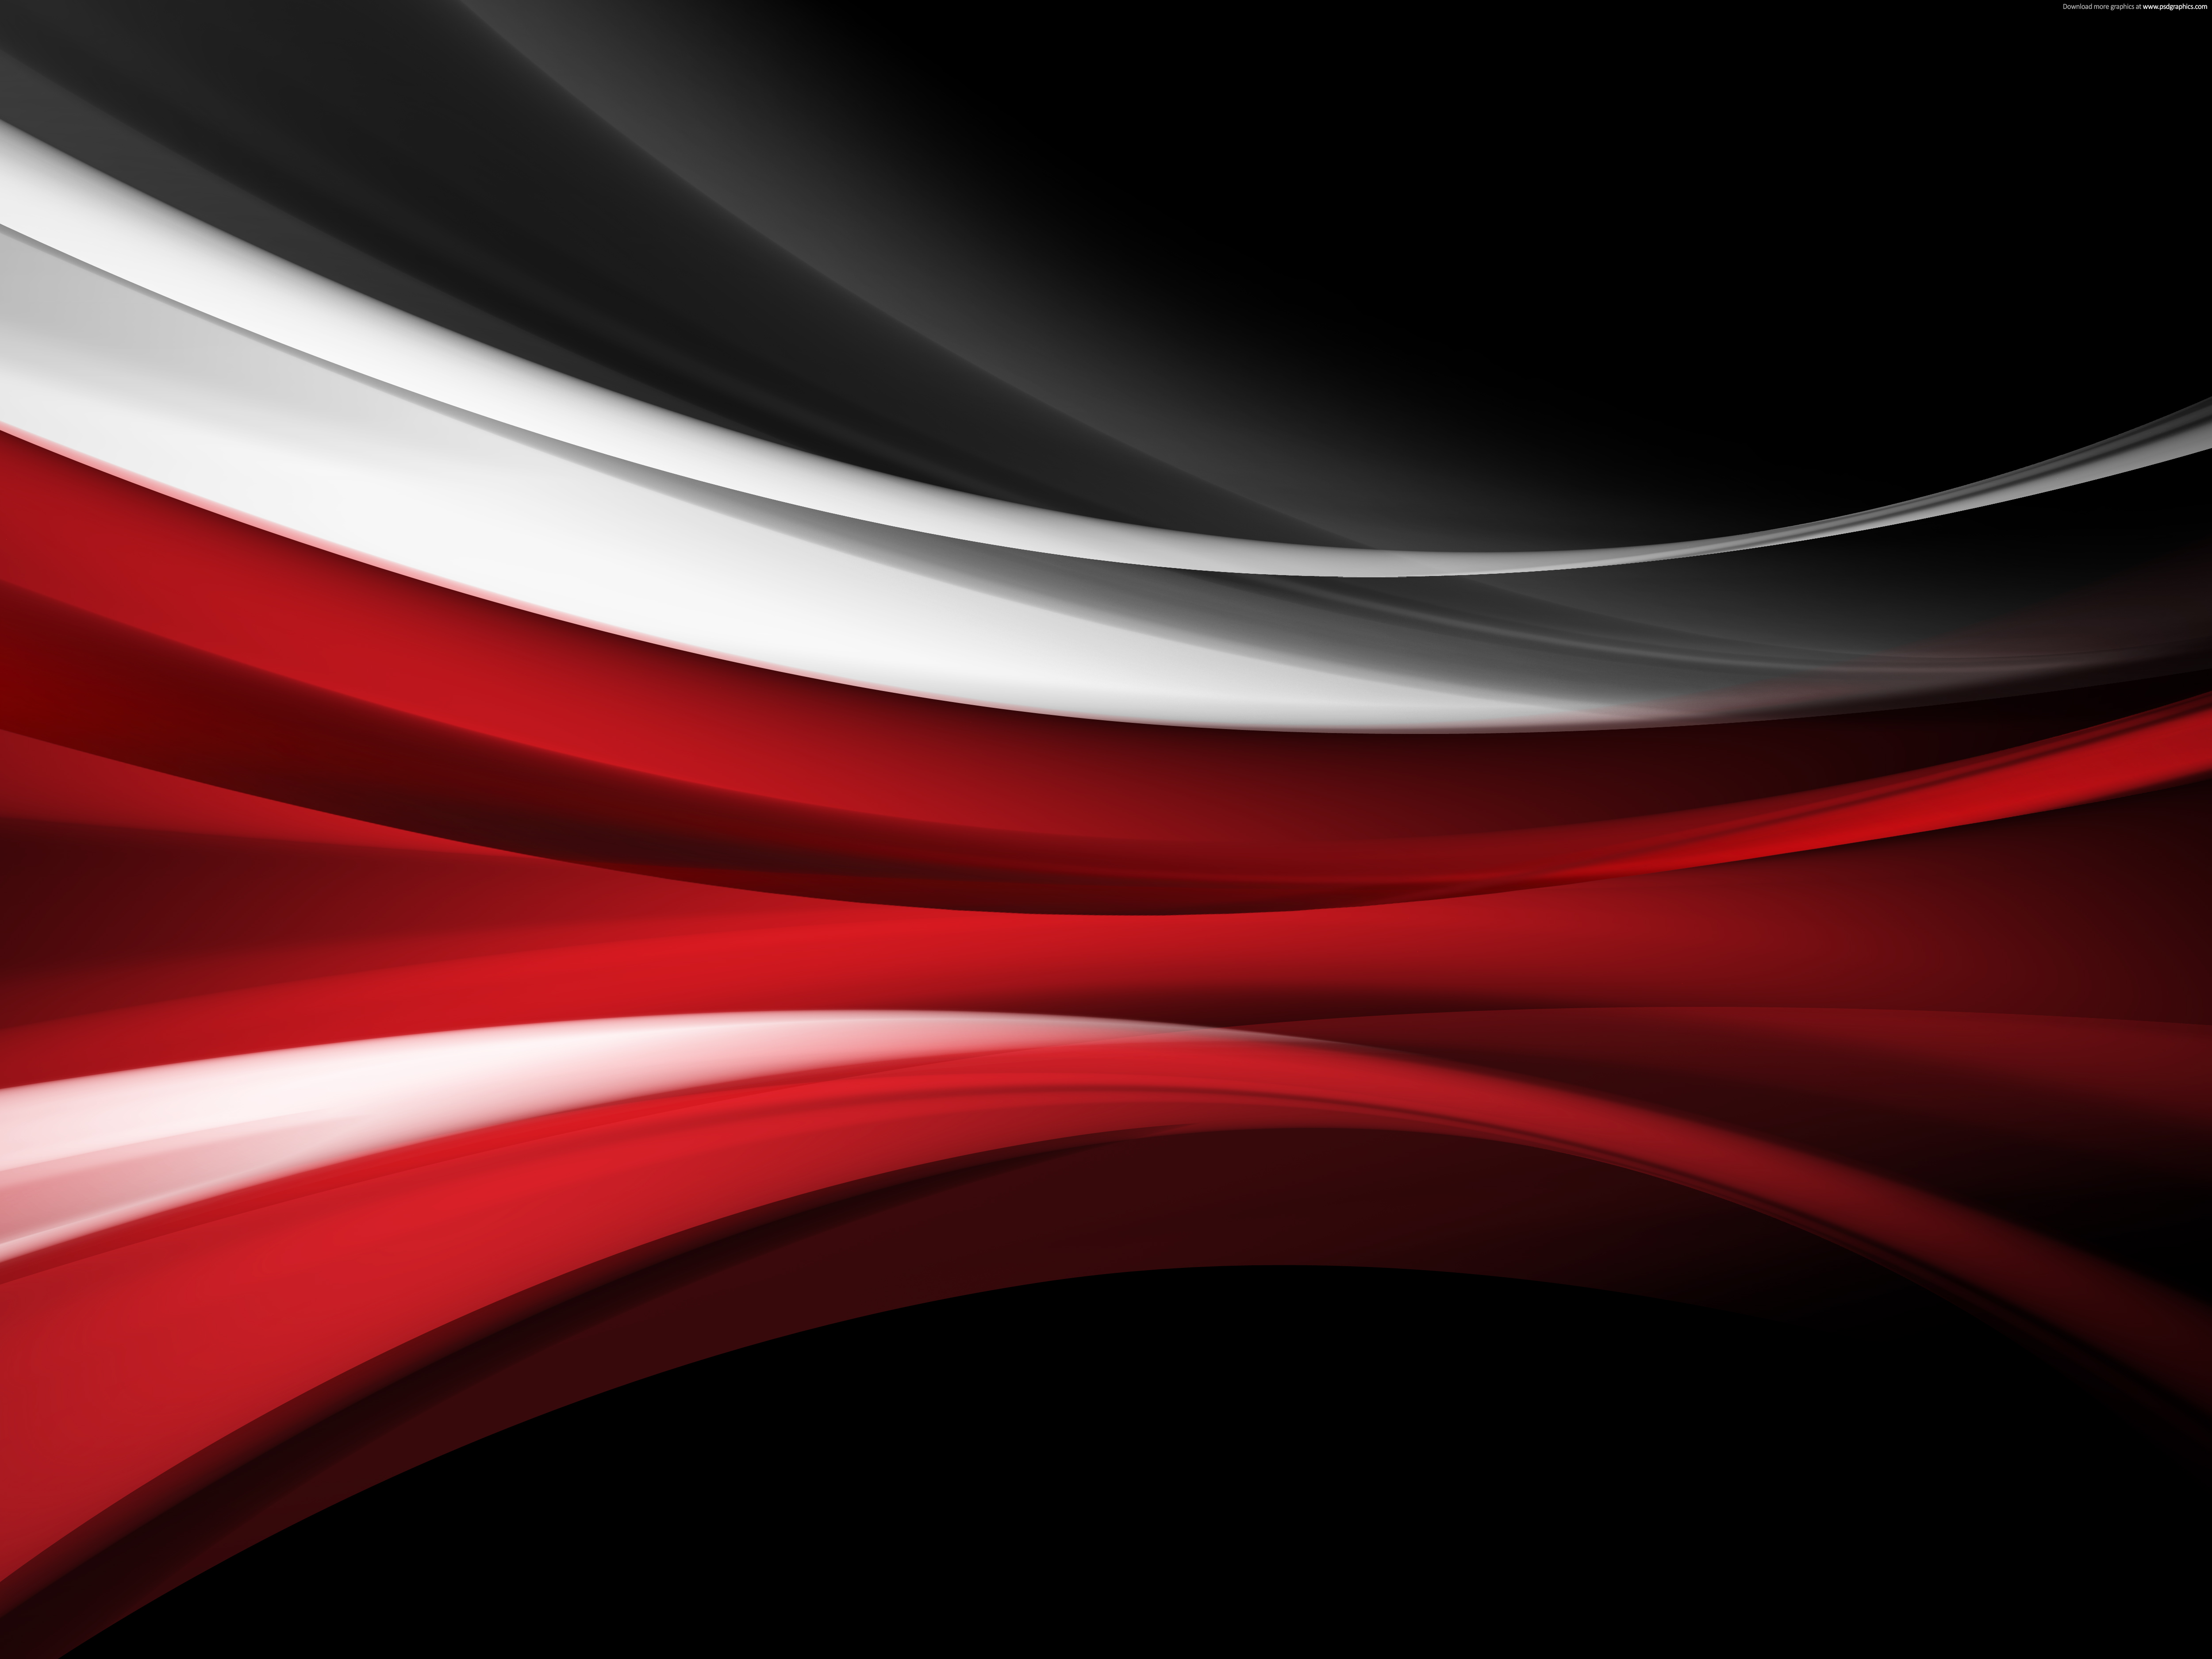  blur background beautiful abstract background red and yellow flowing 5000x3750